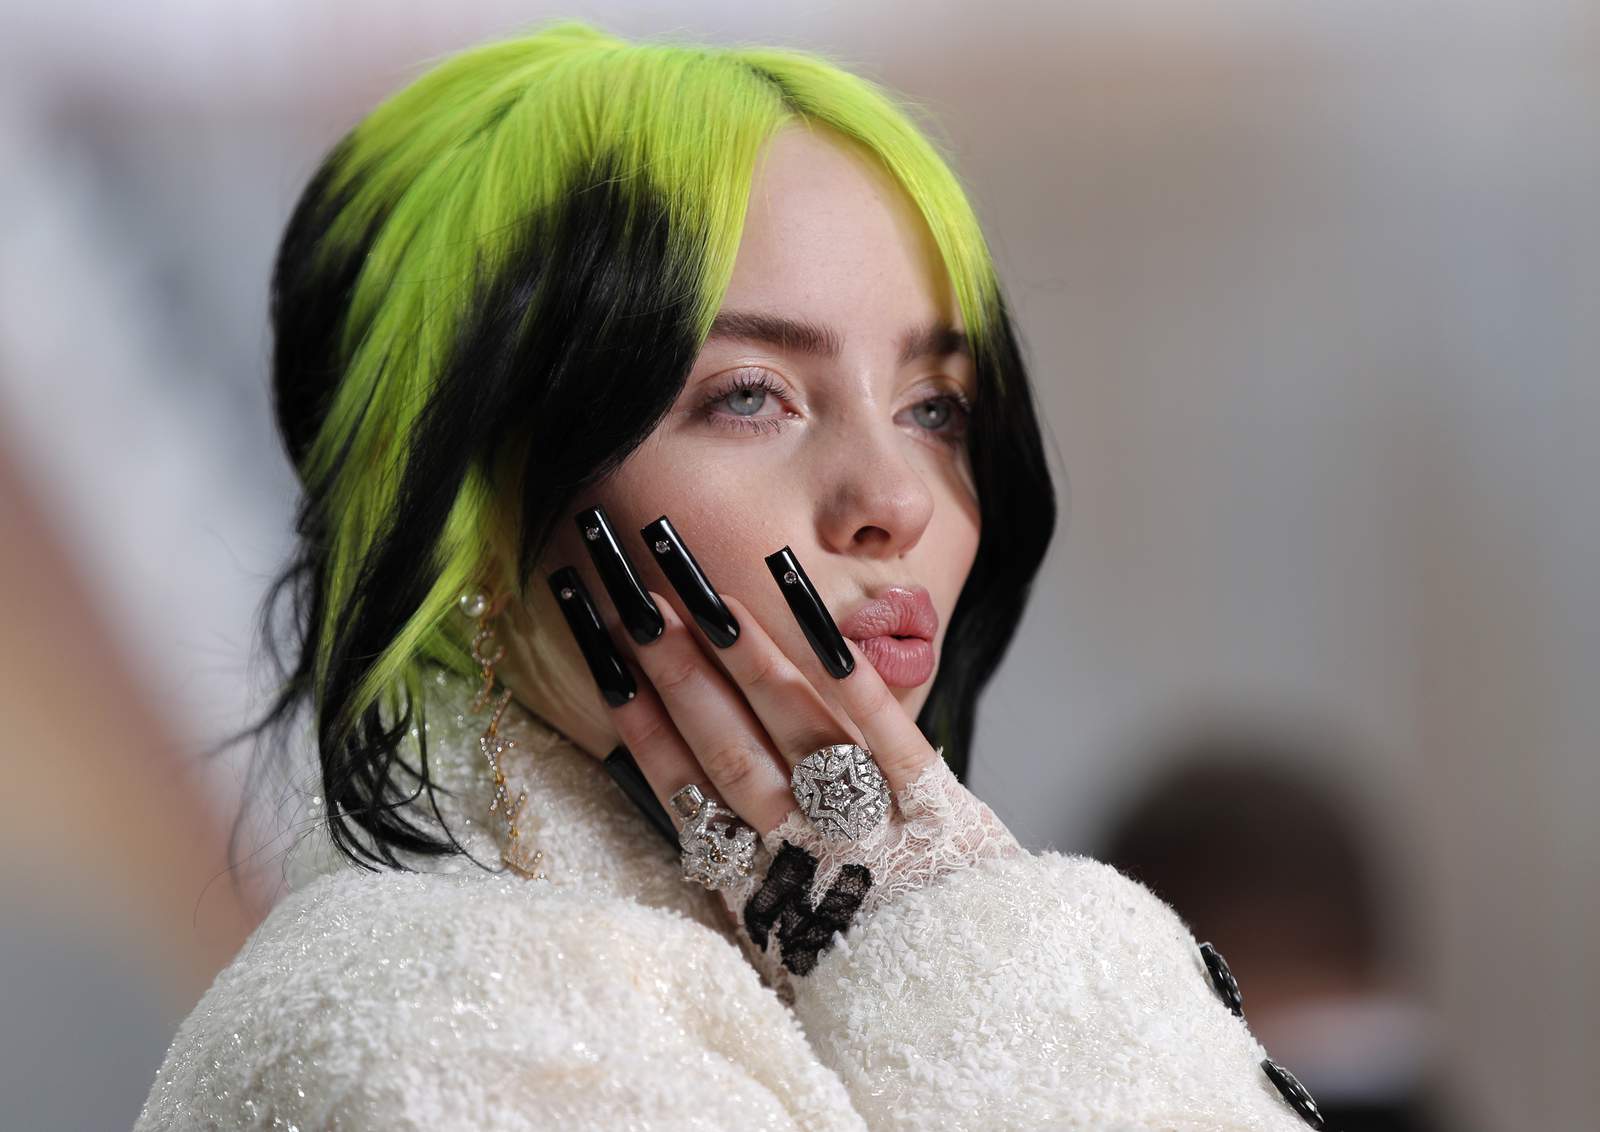 Her past: Billie Eilish photo book coming in May